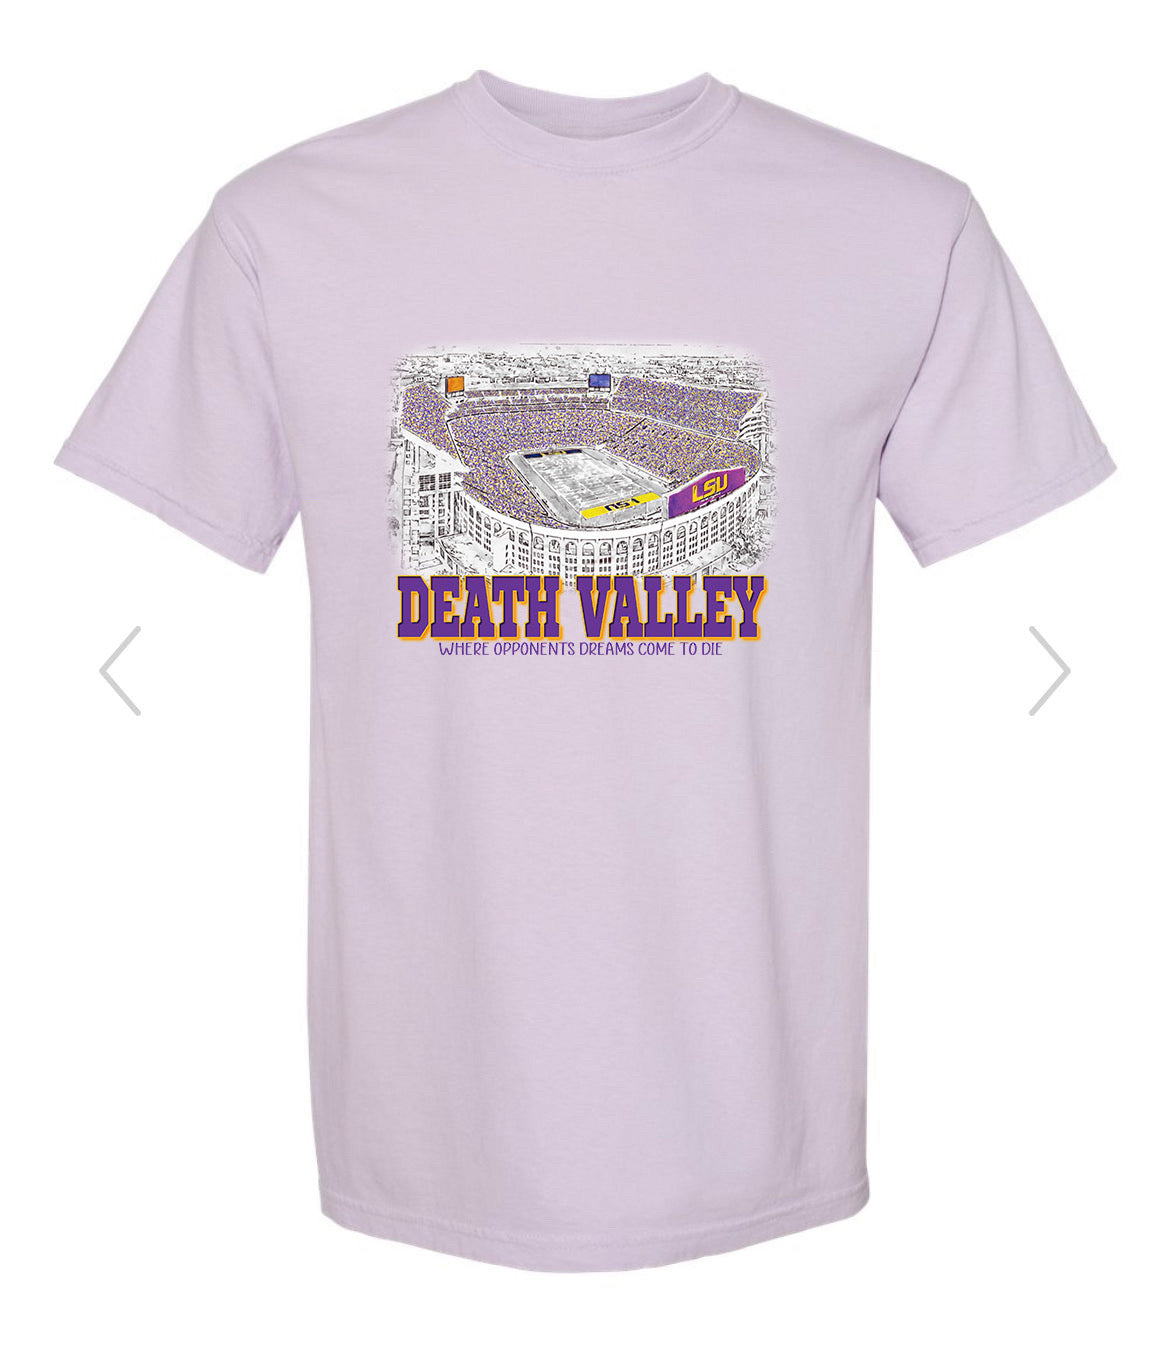 Death Valley.. WHERE OPPONENTS DREAMS COME TO DIE